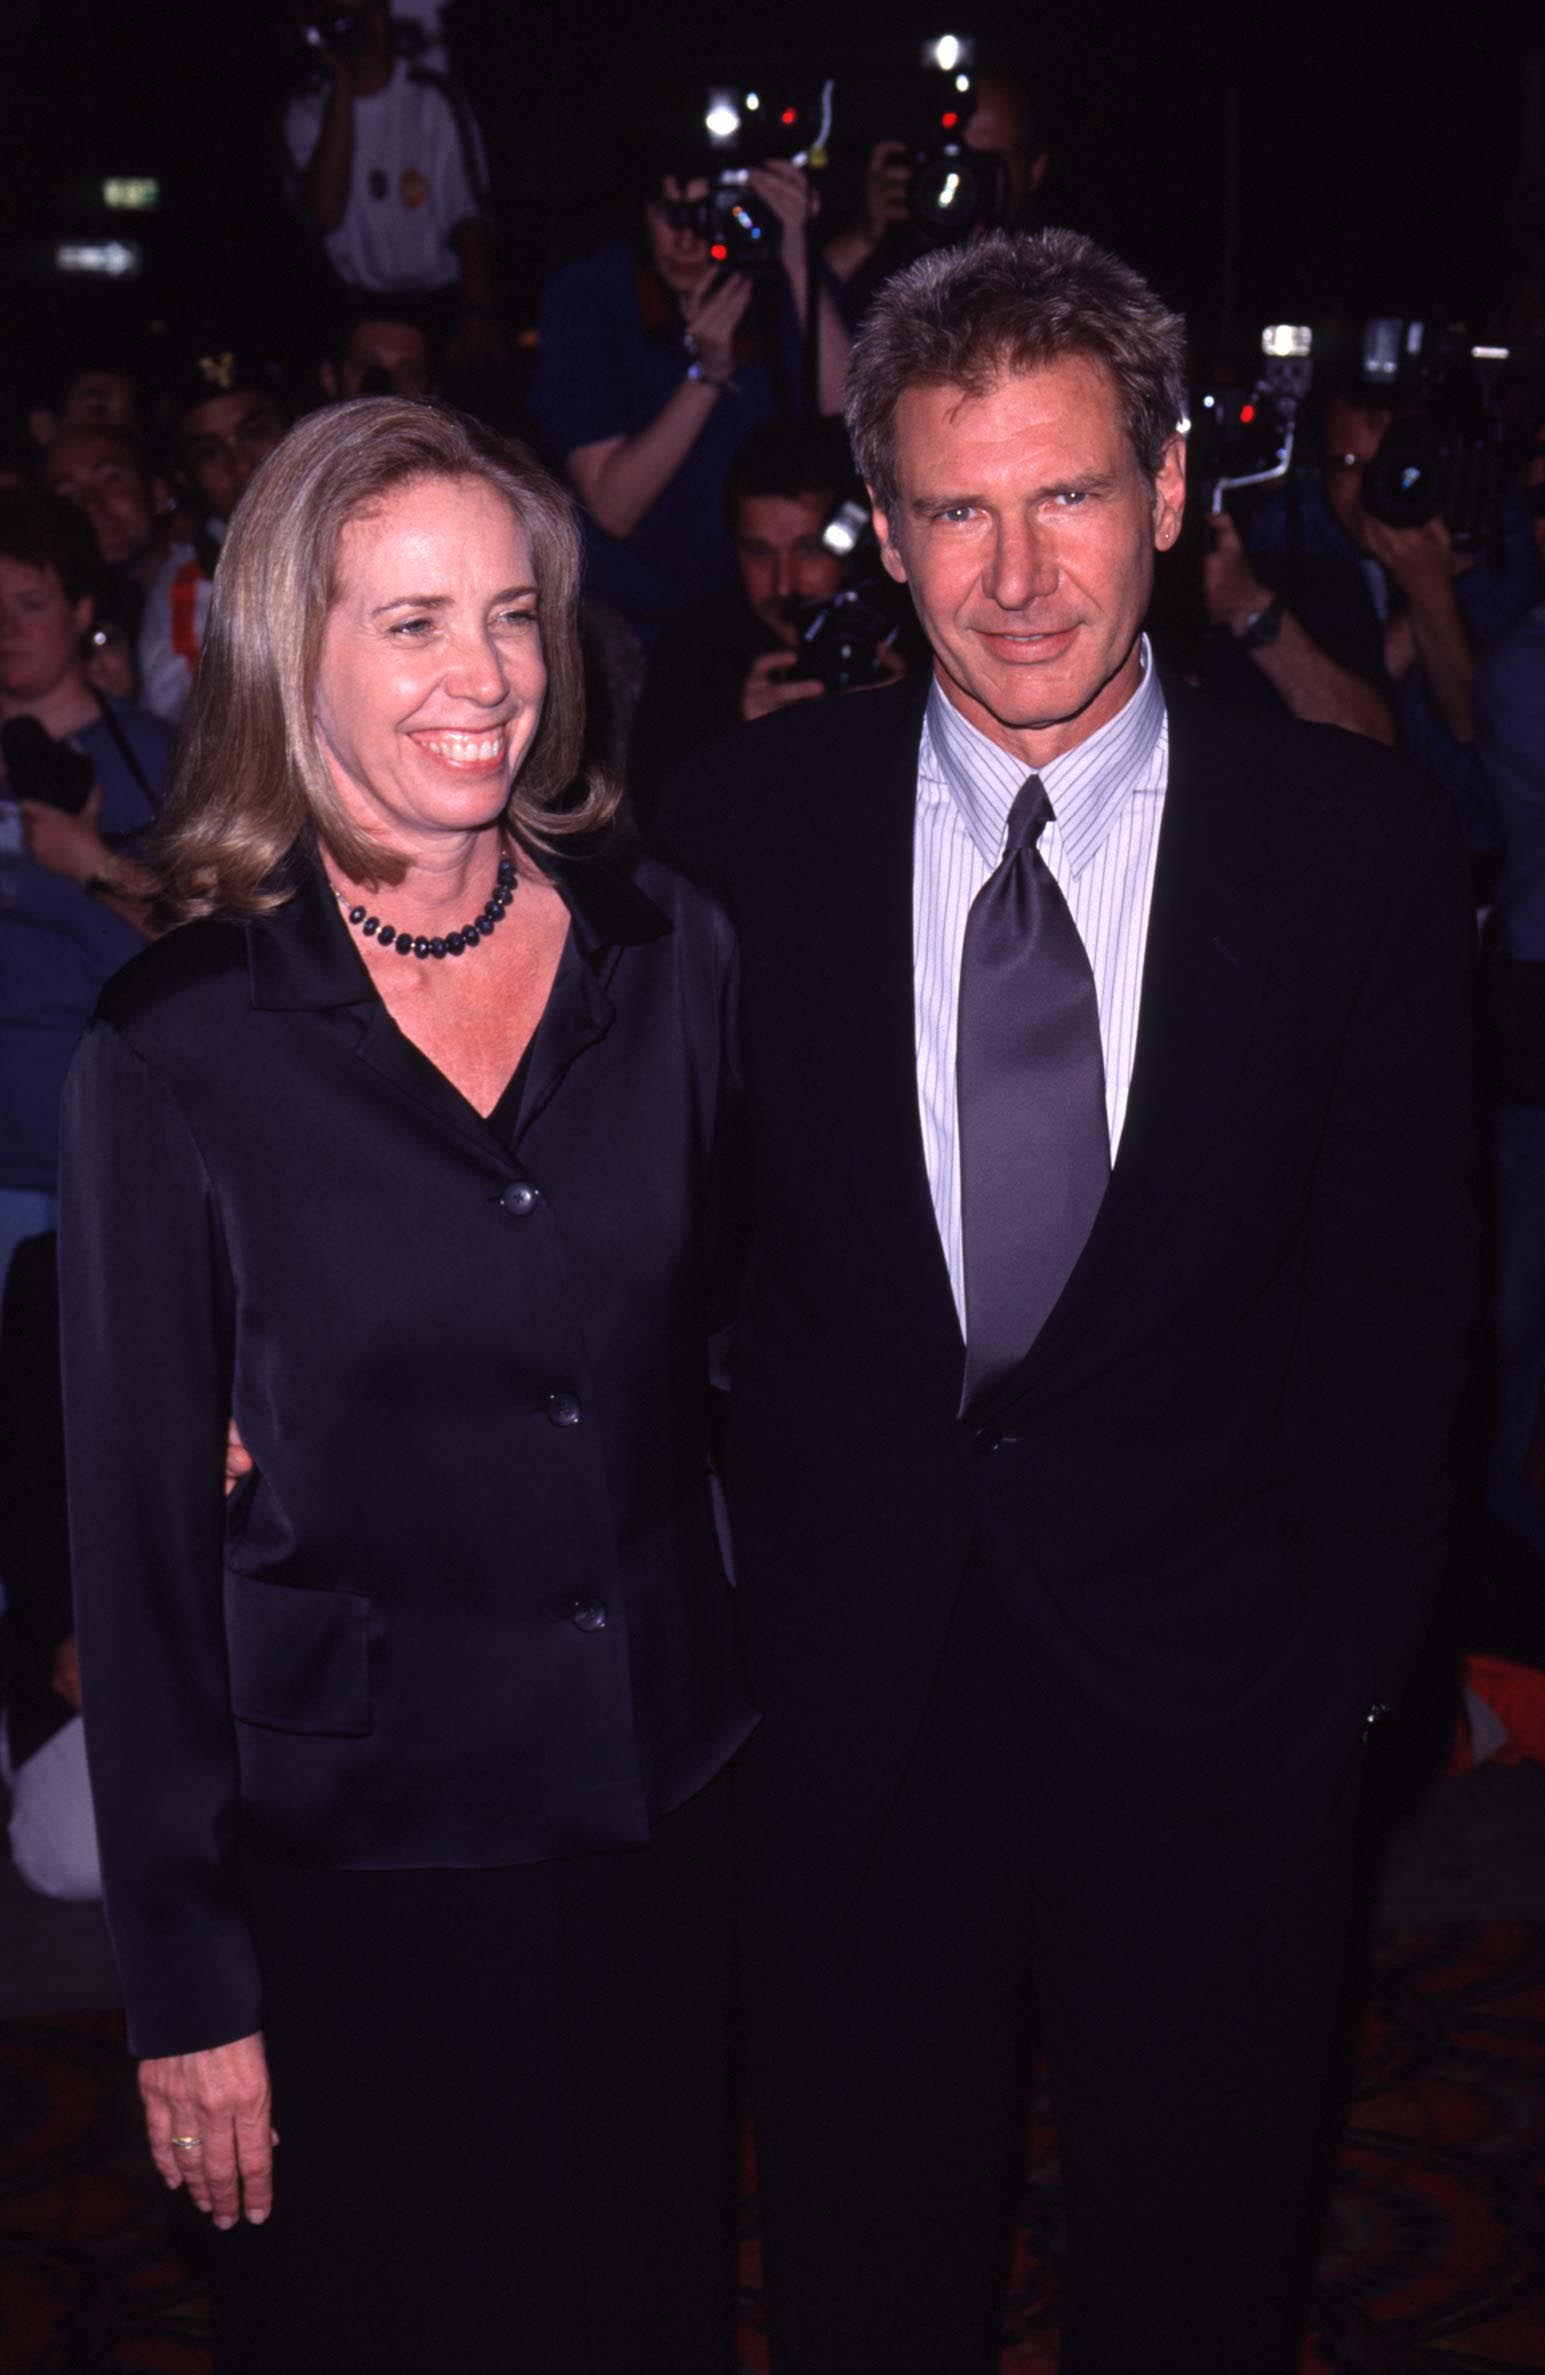 Harrison Ford and Melissa Mathison attend the benefit screening of "Six Days and Seven Nights" on June 11, 1998, in New York City. | Source: Getty Images